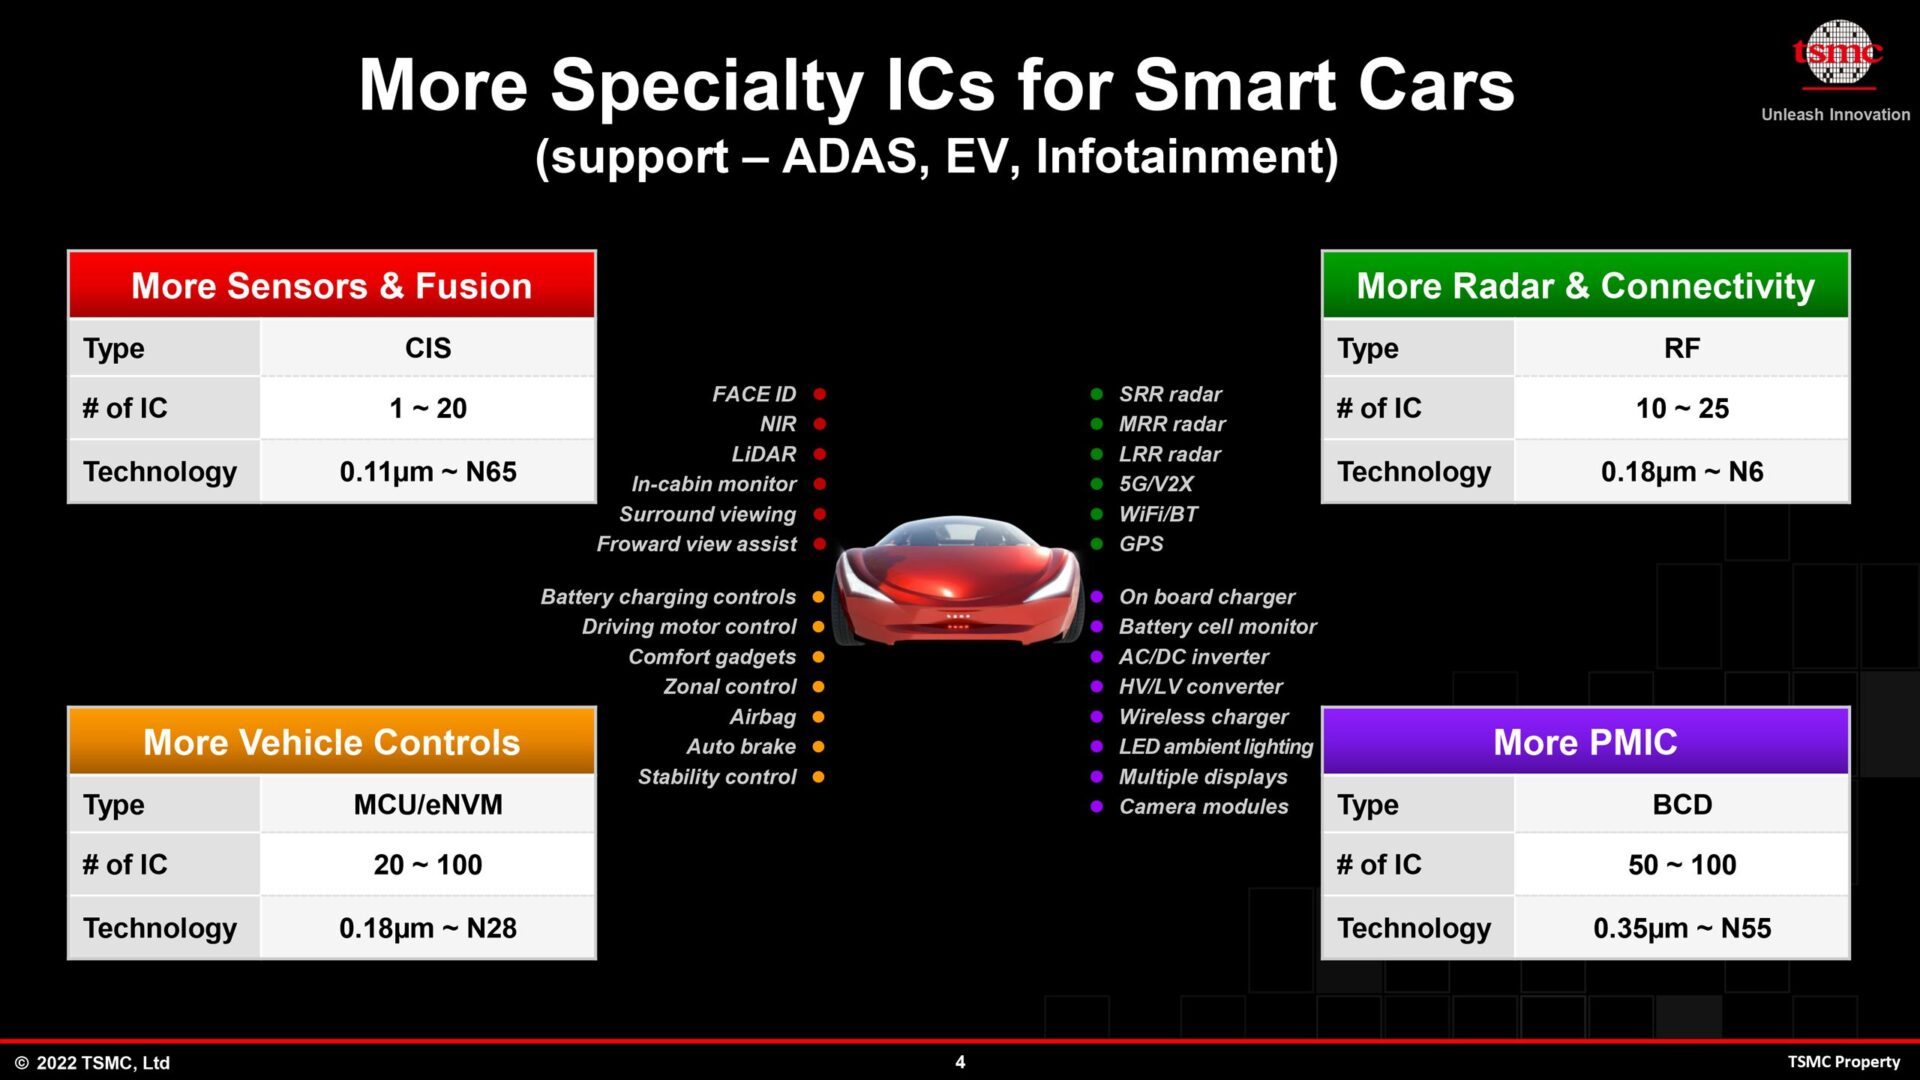 Component details and target etching fineness of automotive semiconductors according to TSMC.